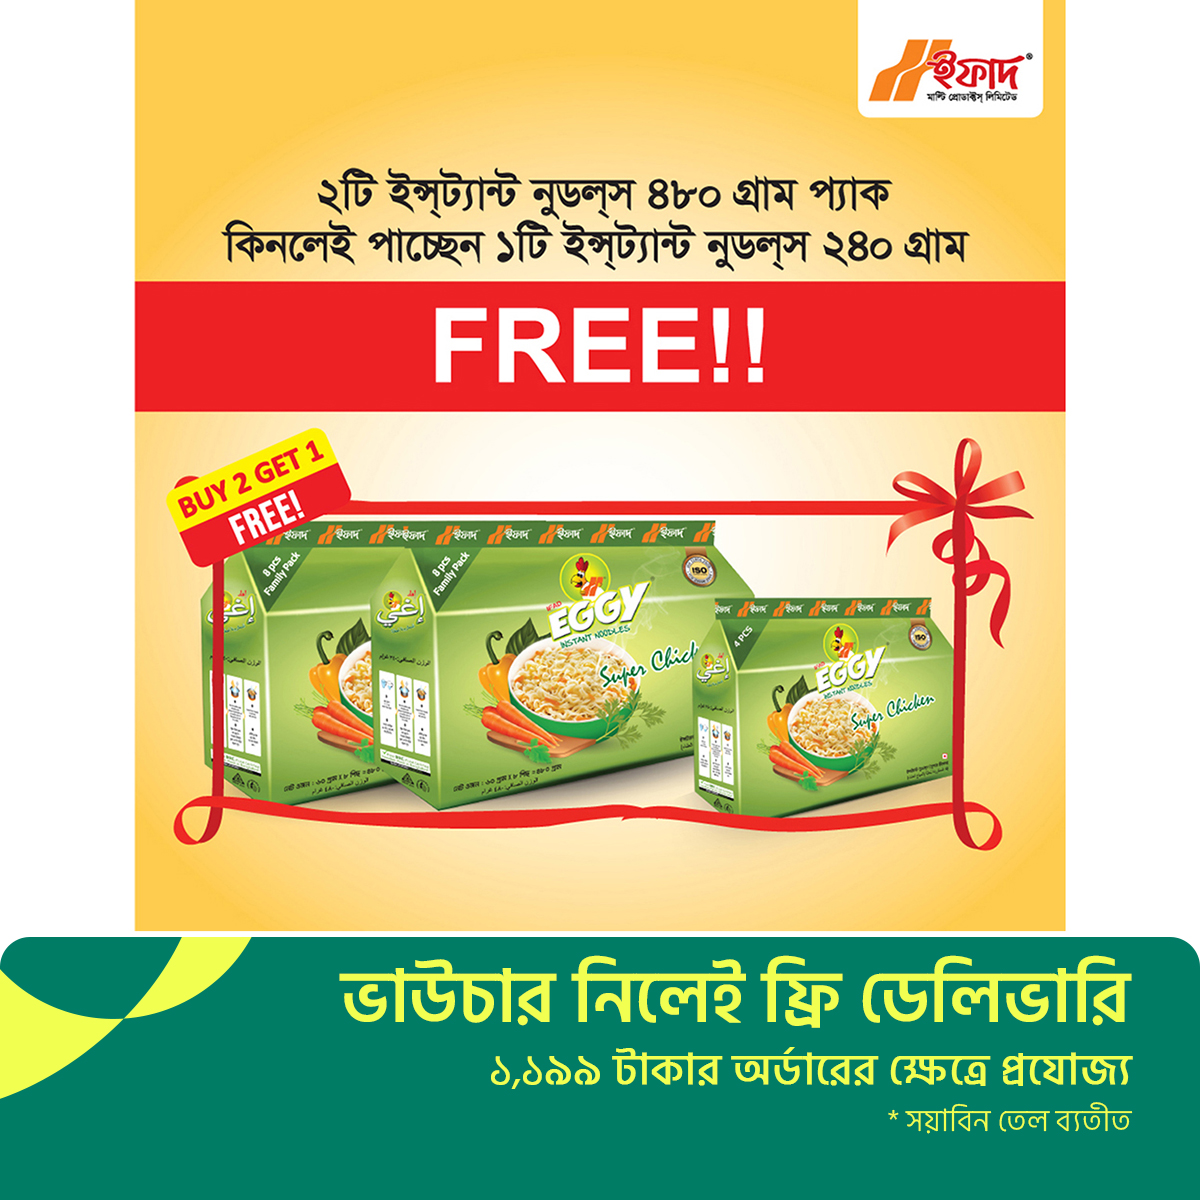 Ifad Eggy Instant Noodles Chicken 480gm- Buy 2 Get Free Instant Noodles 240gm